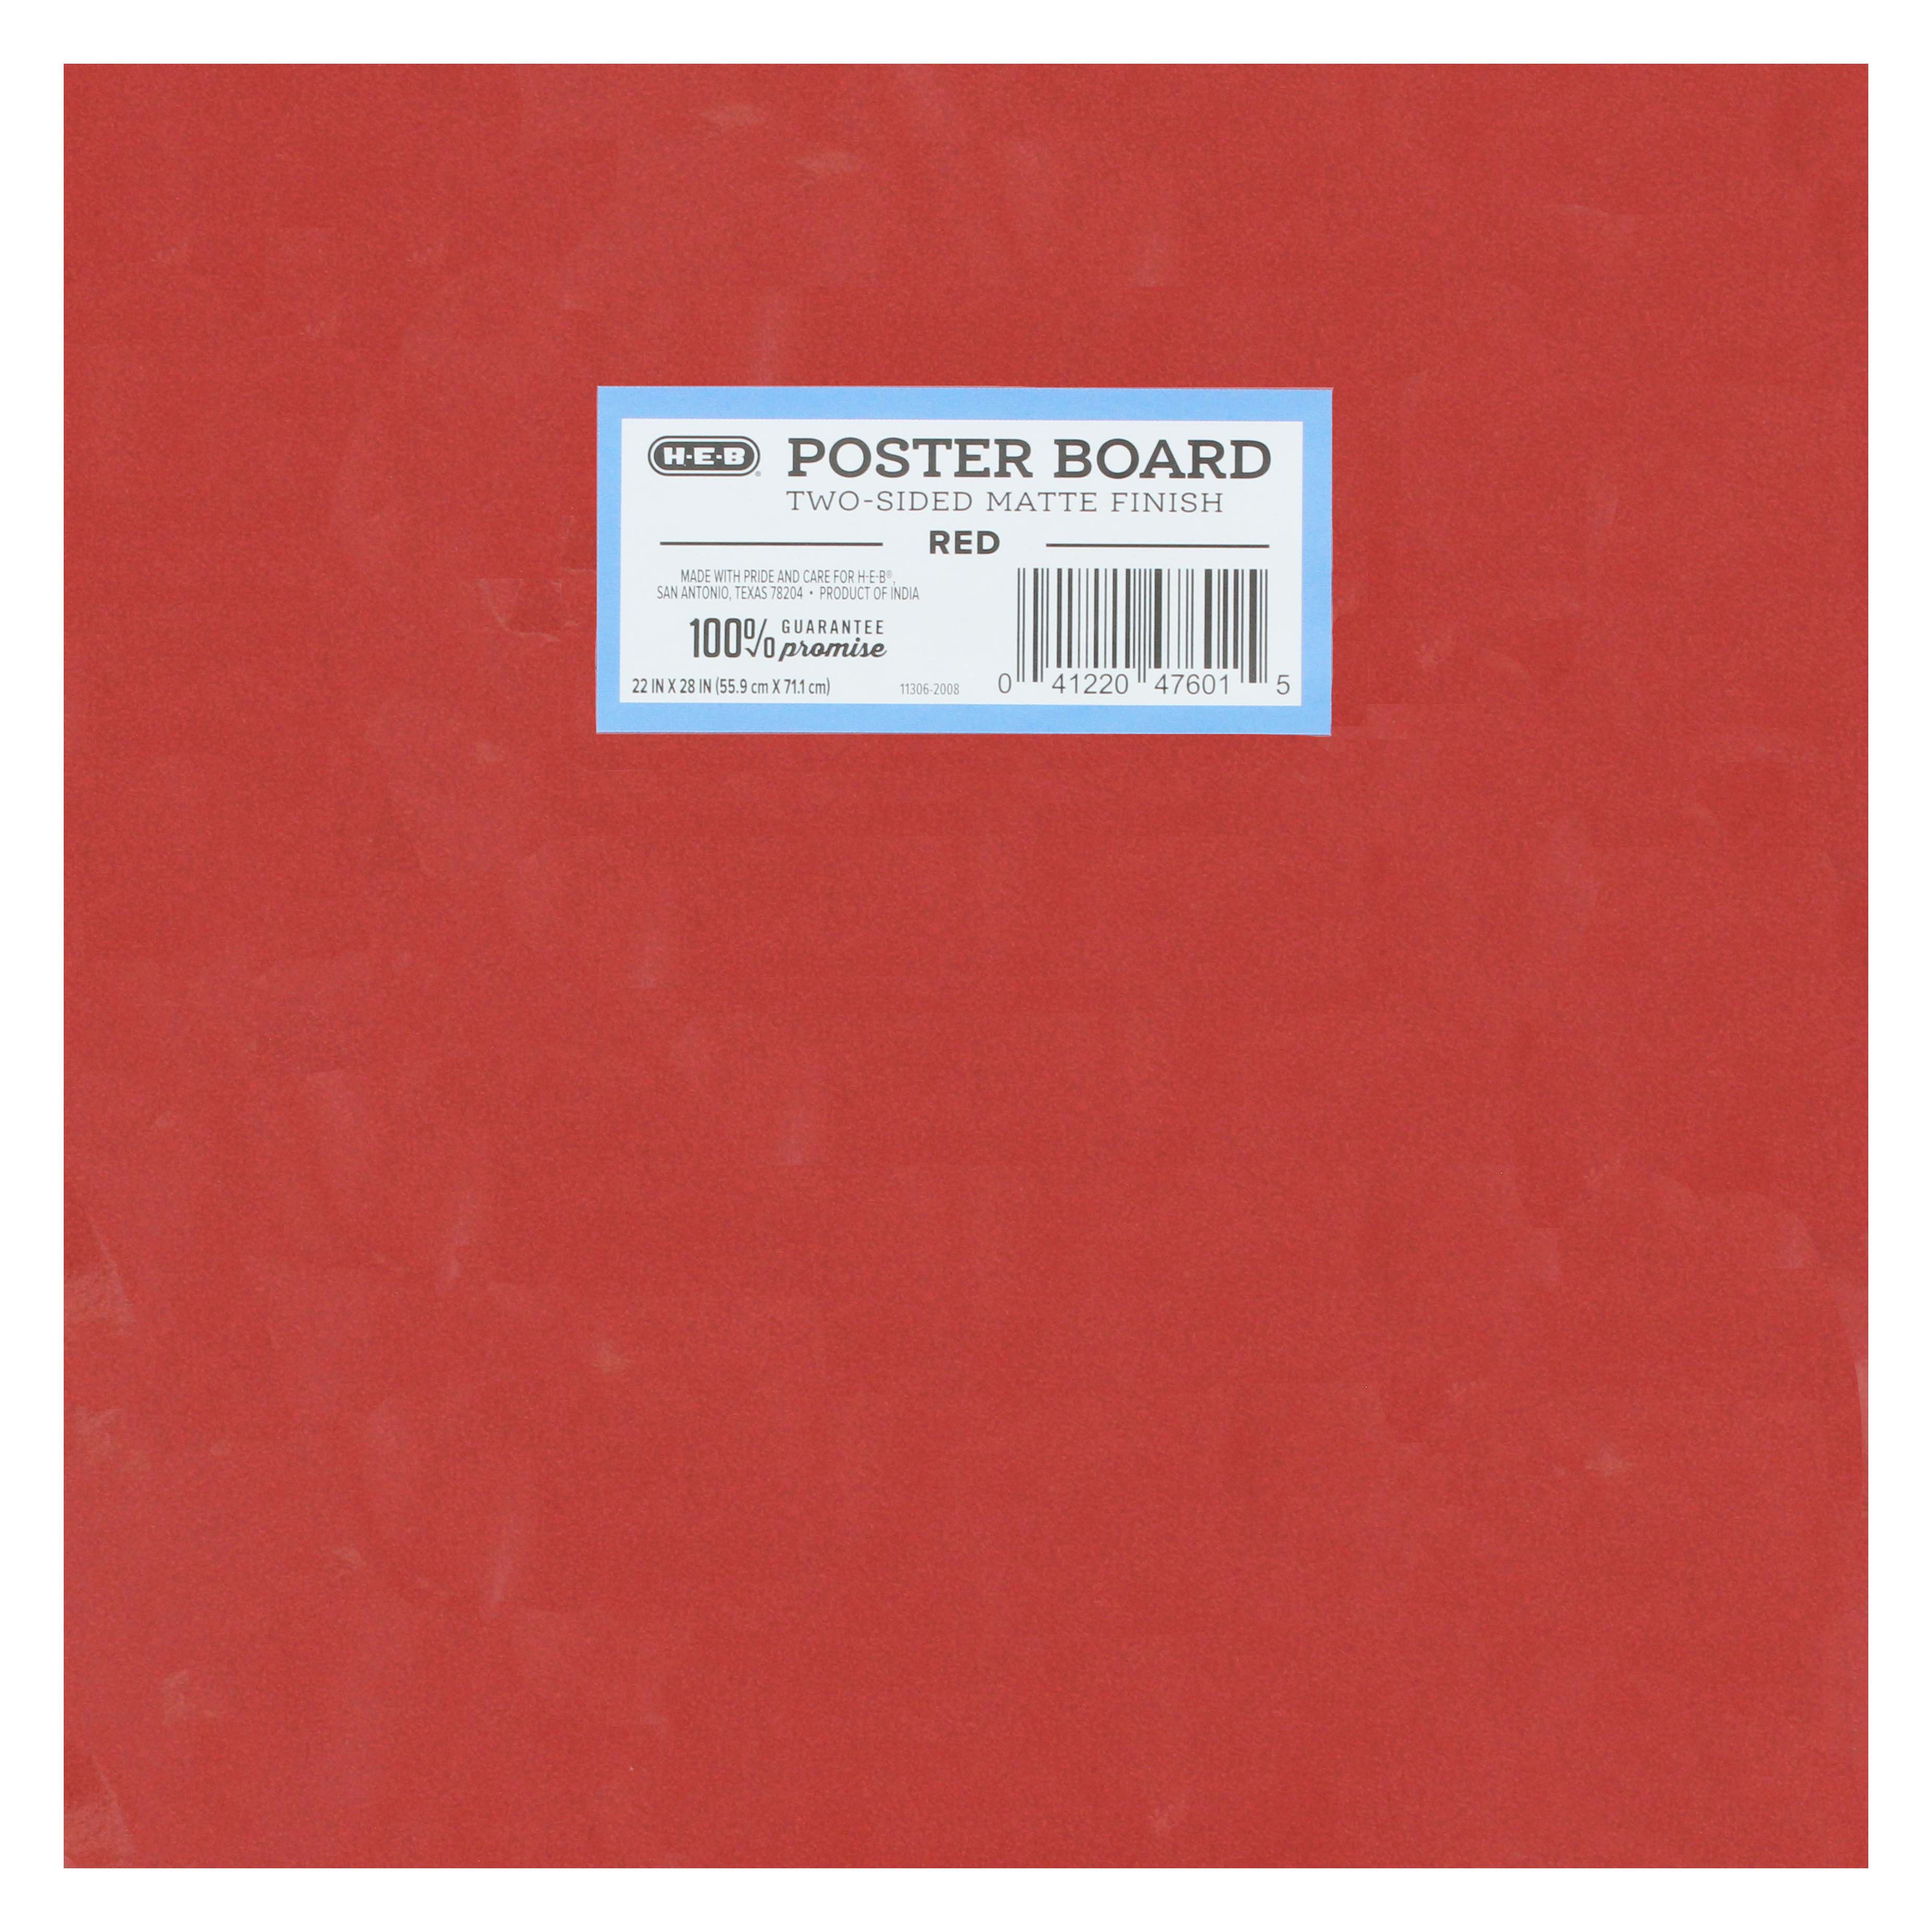 Heavy Poster Board, 22 x 28 Inches, Red, 1 Piece, Mardel